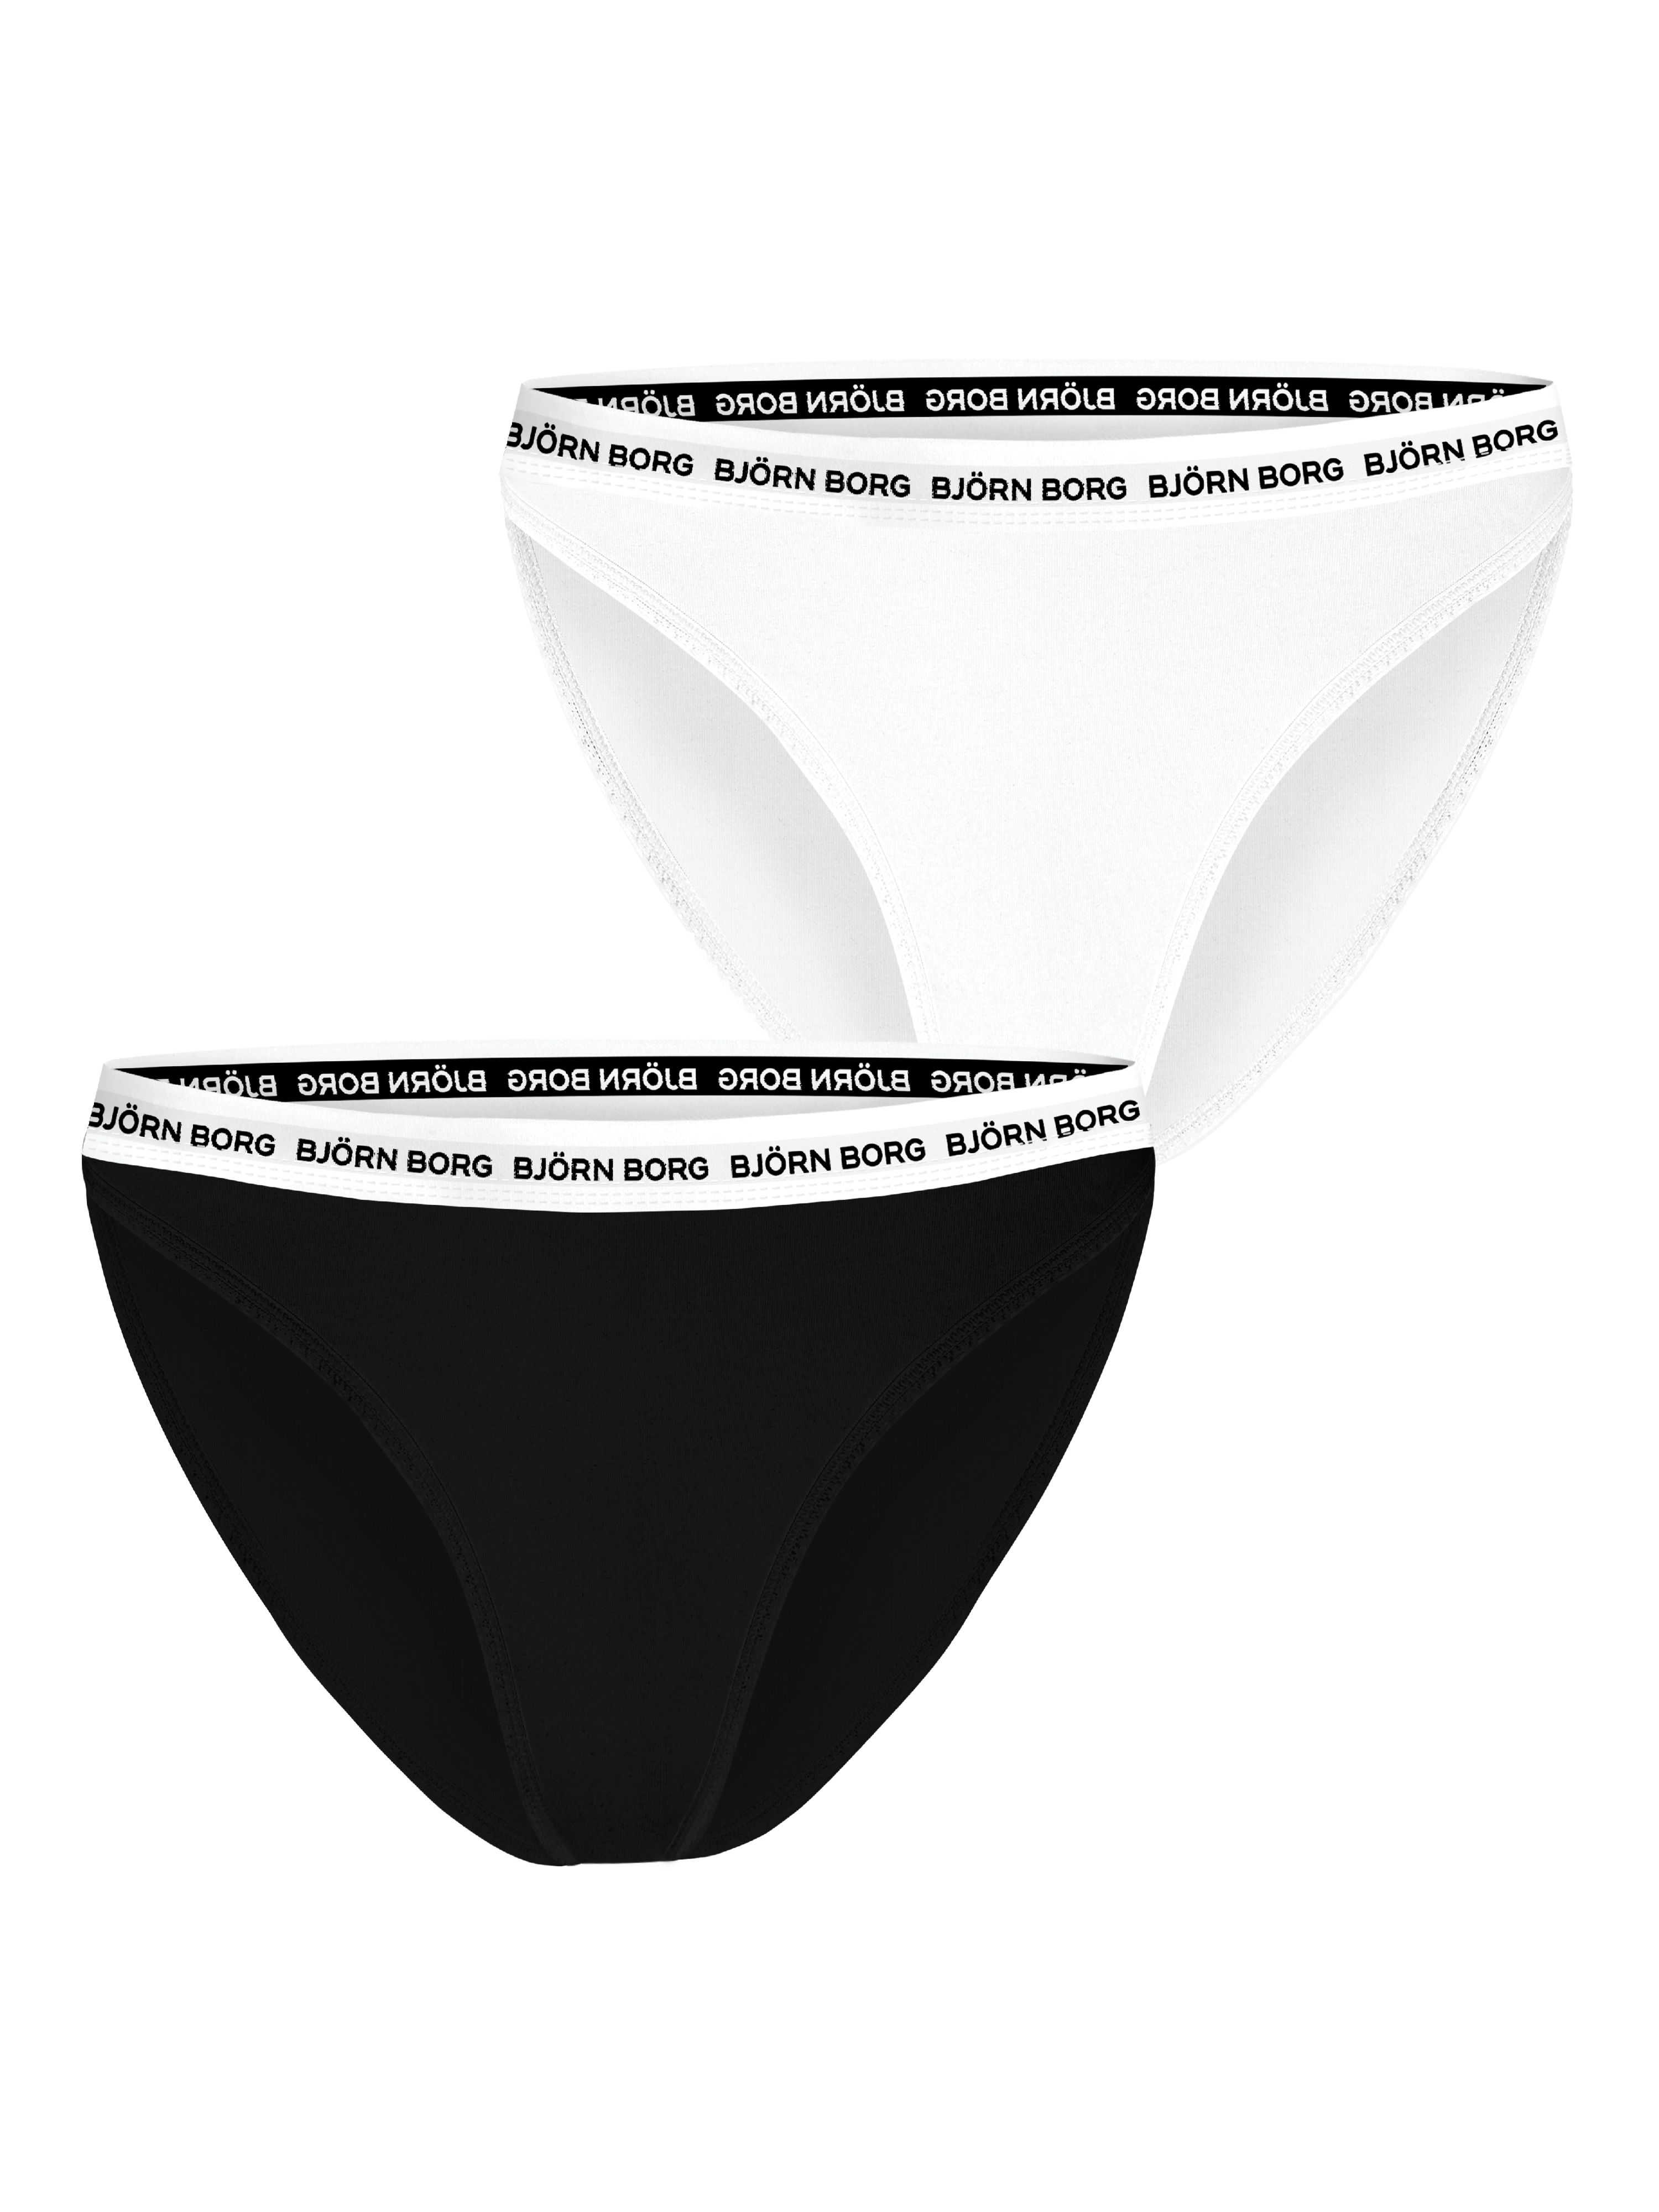 Buy New Balance Women's Premium Performance Logo Elastic Hipster (3 Pack or  6 Pack of Women's Underwear) at